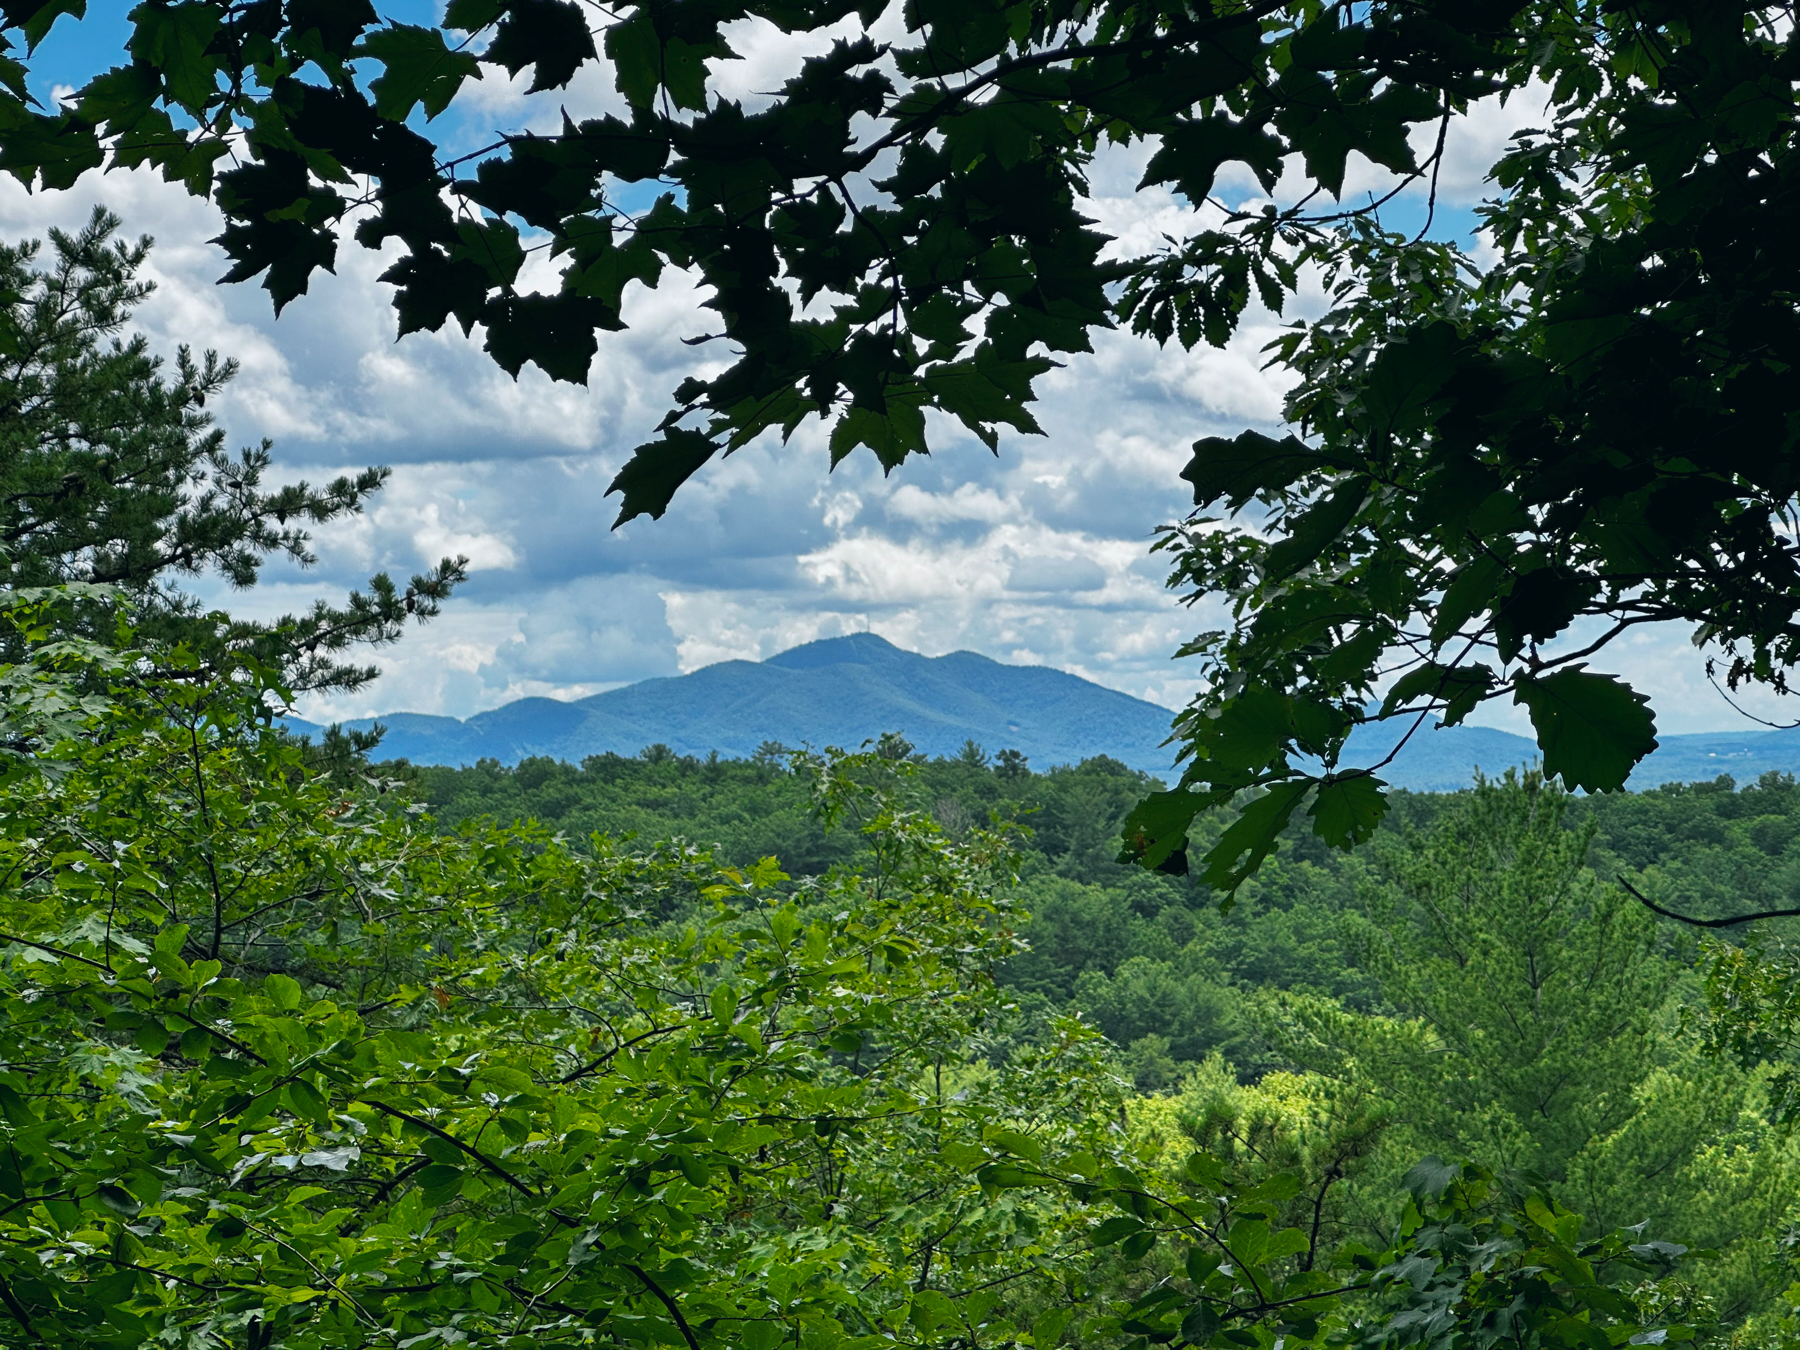 The Blue Ridge Mountains in the background, forest for as far as the eye can see in the foreground.